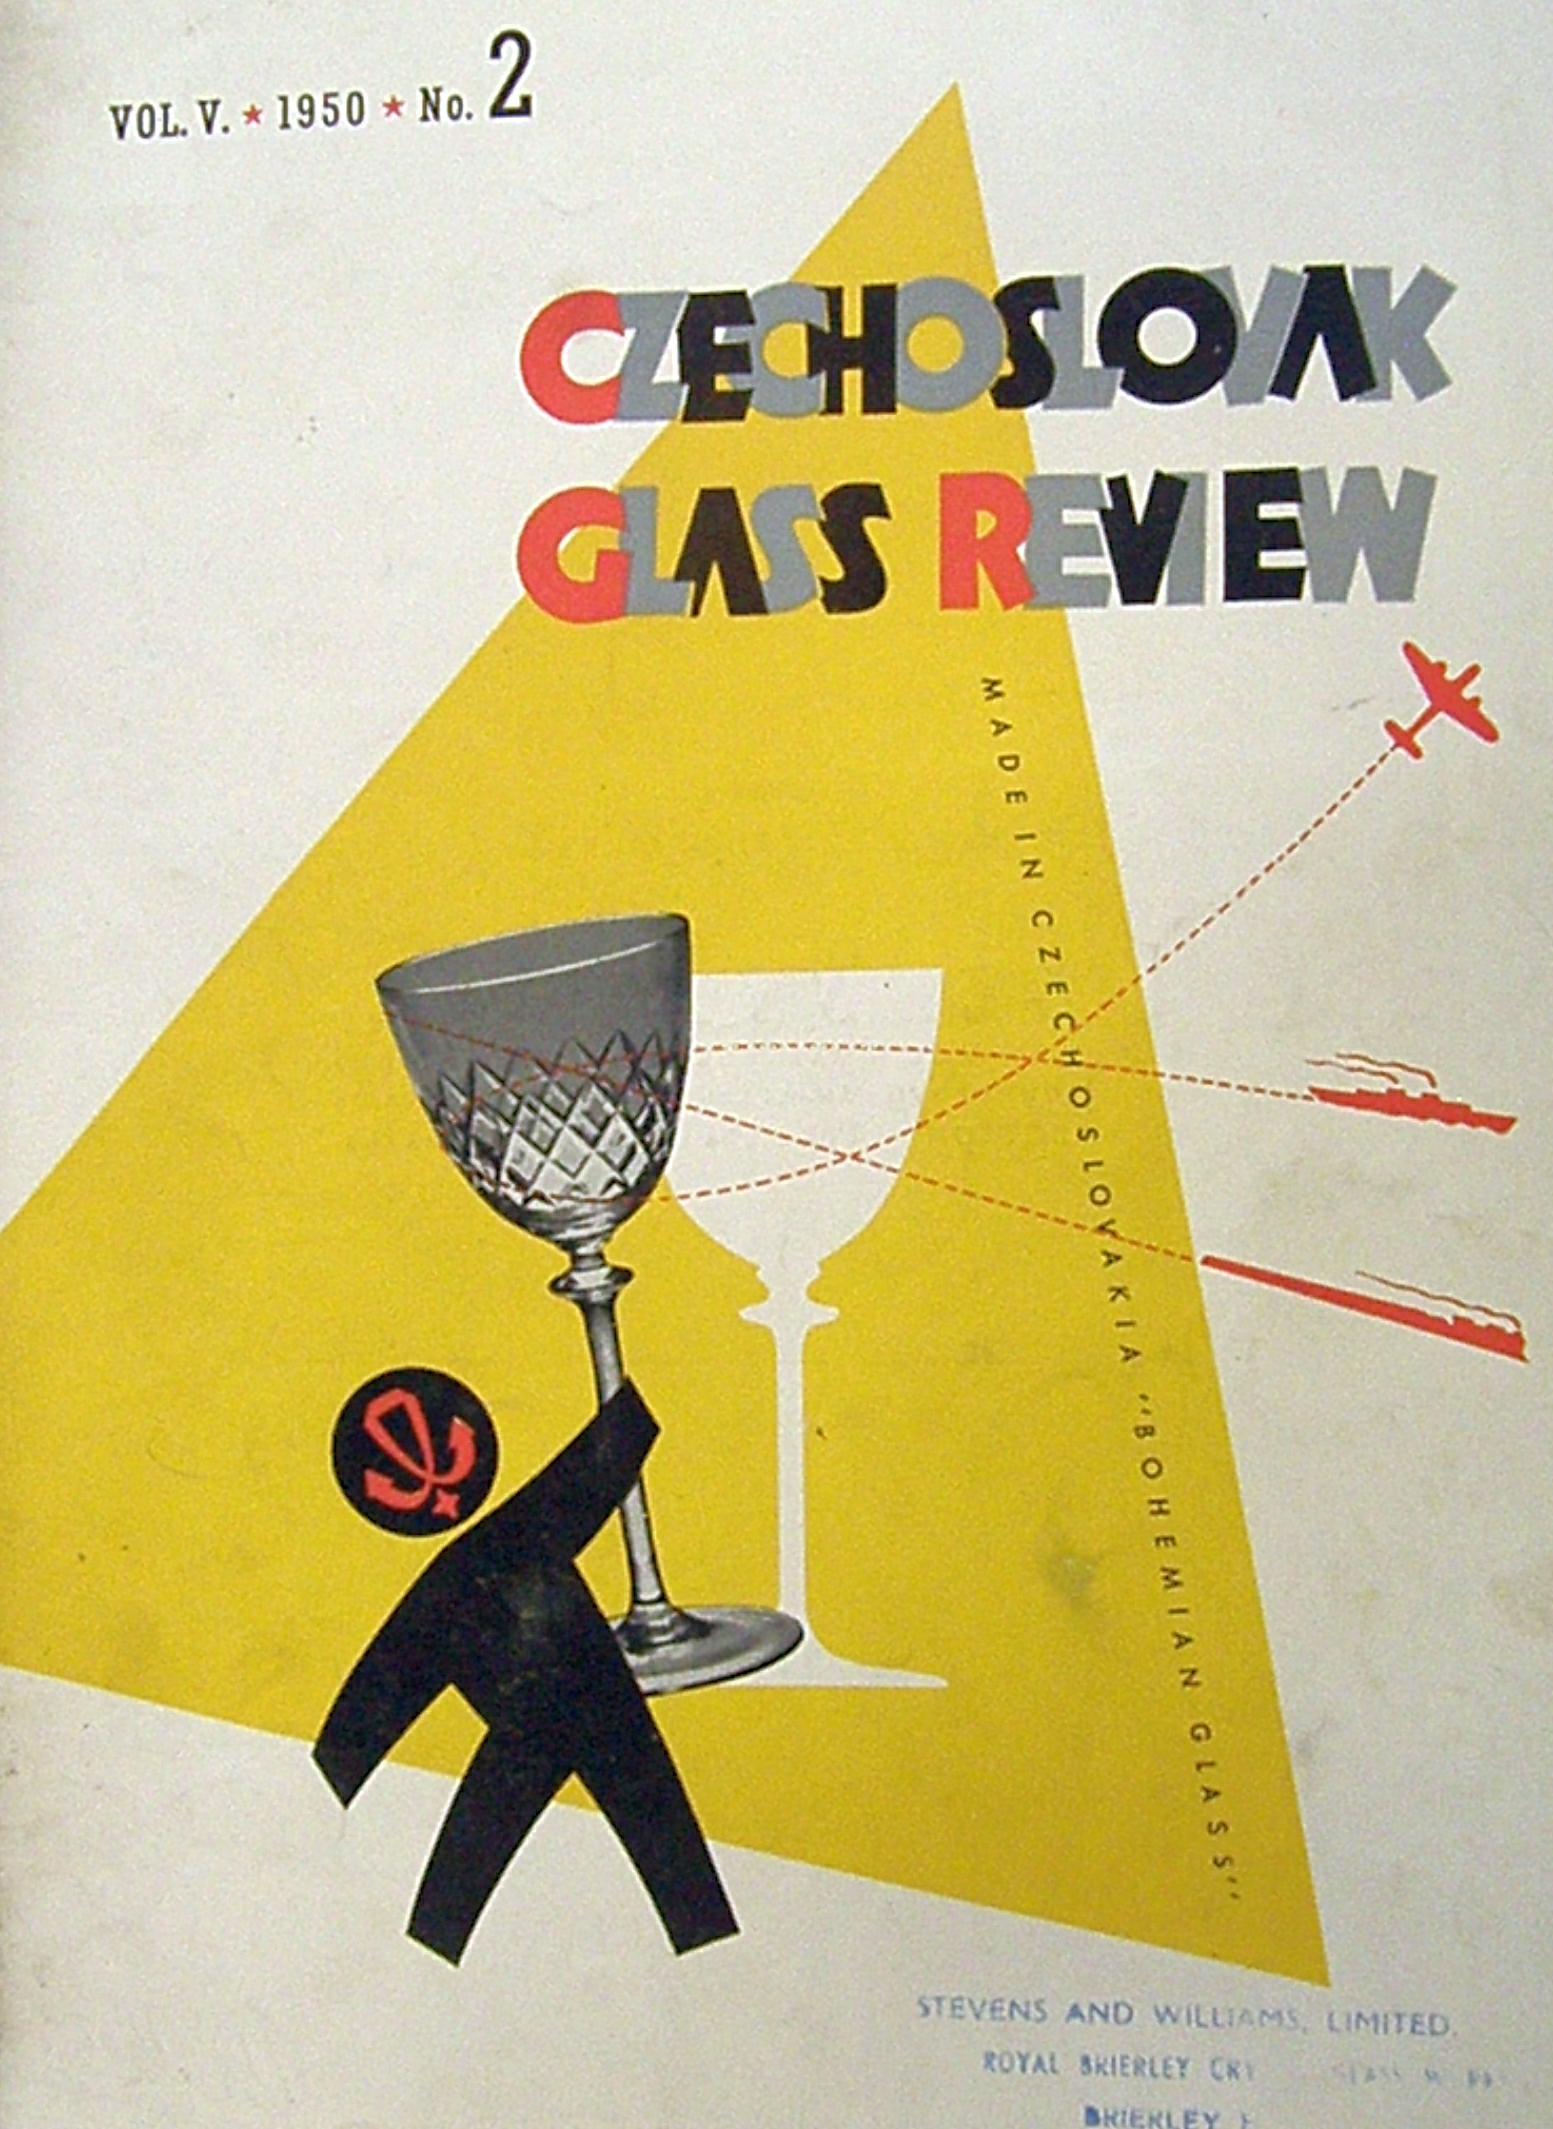 Glass Review 1950/2